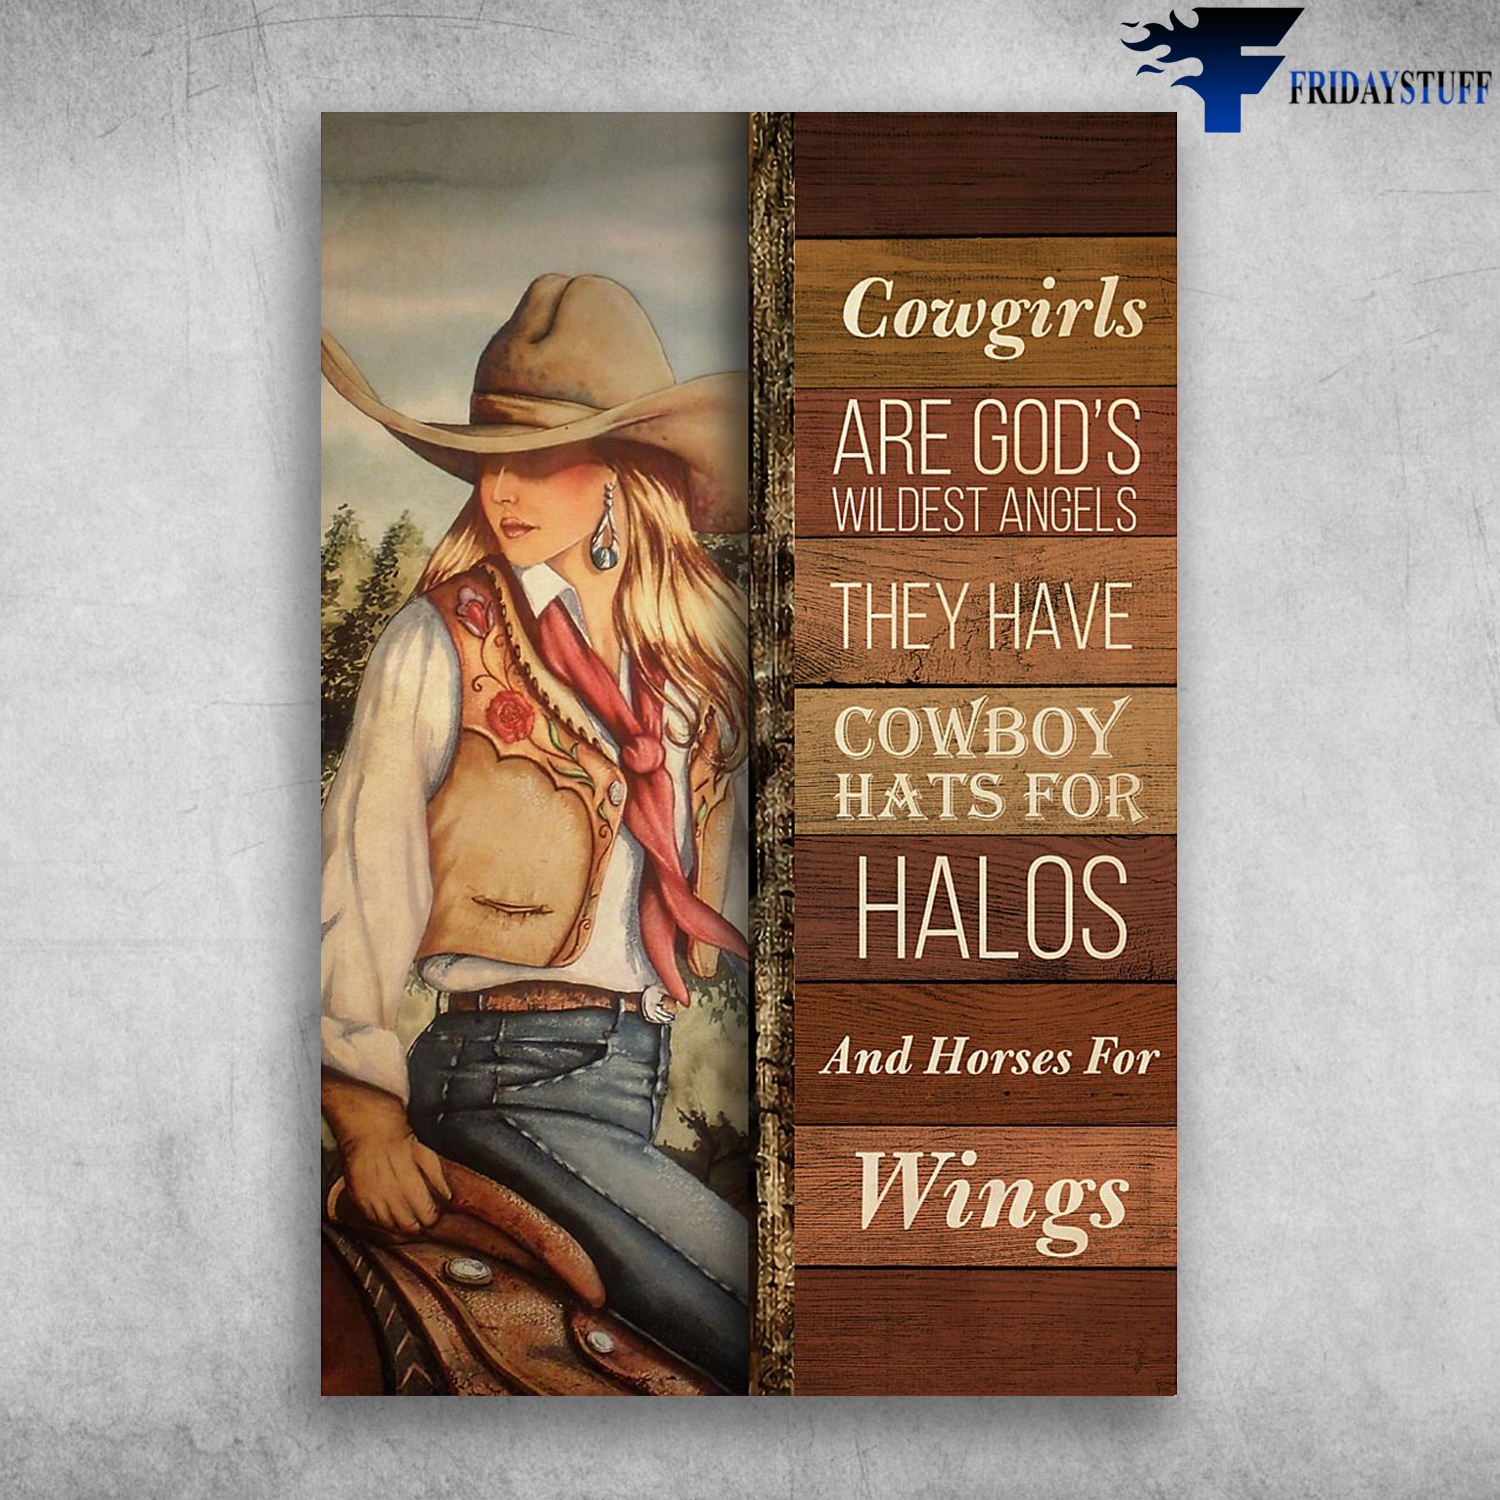 Cowgirls Are Gods Wildest Angels They Have Cowboy Hats For Halos